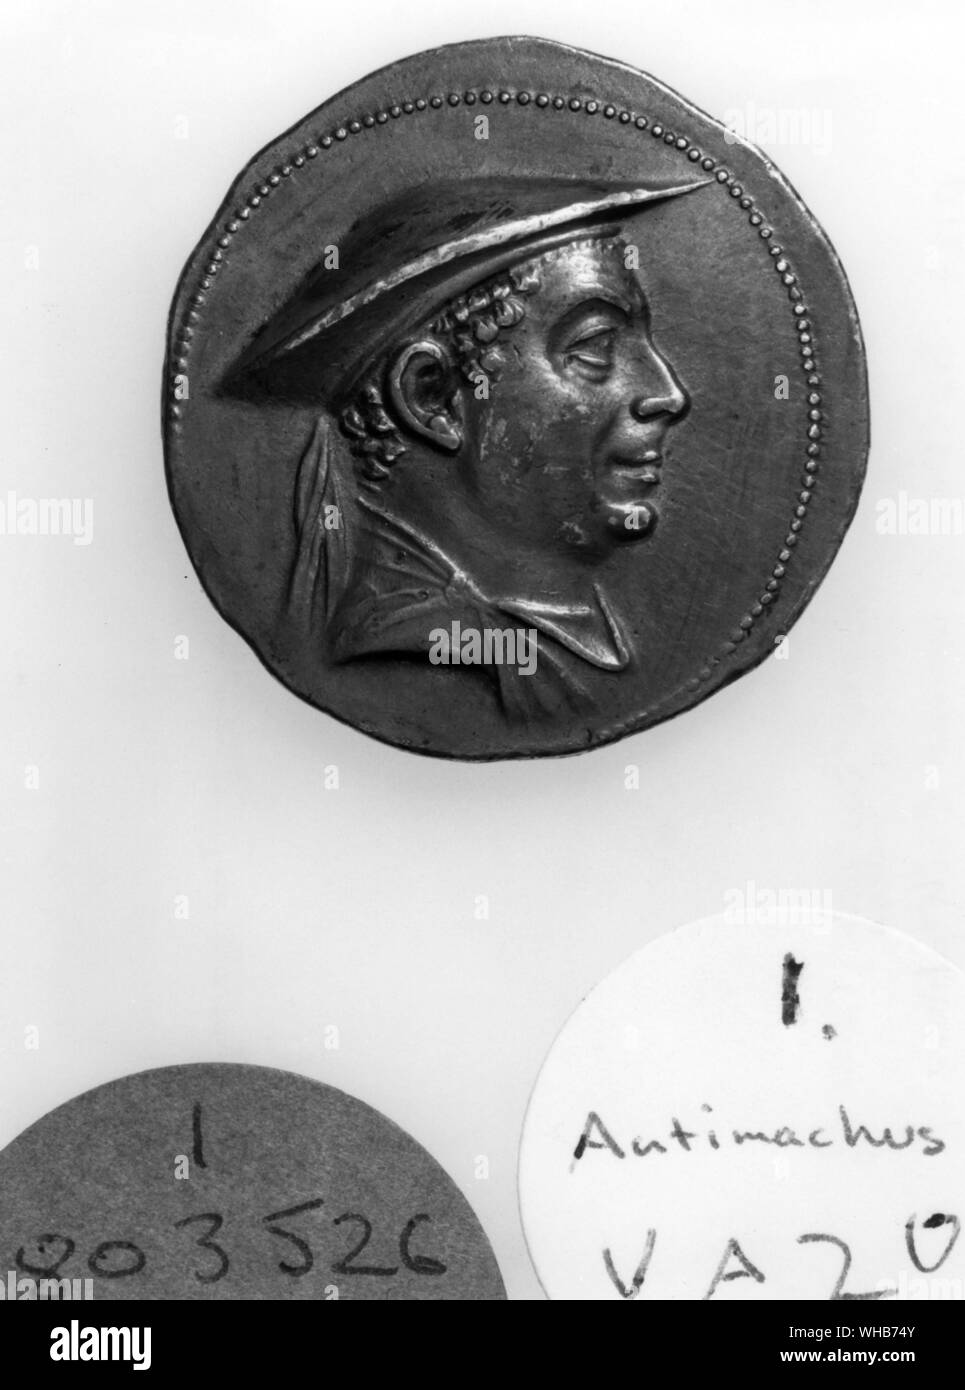 Coin of a Graeco-Bactrian ruler of north west India - Silver coin of Antimachus I (171-160 BC). Anthimachus I was one of the Greco-Bactrian kings from around 185 to 170 BC.. Obv: Bust of Antimachus I.. Rev: (not shown here) Depiction of Poseidon, with Greek legend BASILEOS TEOU ANTIMACHOU God-King Antimachus -. The Greco-Bactrian Kingdom (or Graeco-Bactrian Kingdom) covered the areas of Bactria and Sogdiana, comprising today's northern Afghanistan and parts of Central Asia, the easternmost area of the Hellenistic world, from 250 to 125 BCE. The expansion of the Greco-Bactrians into northern Stock Photo